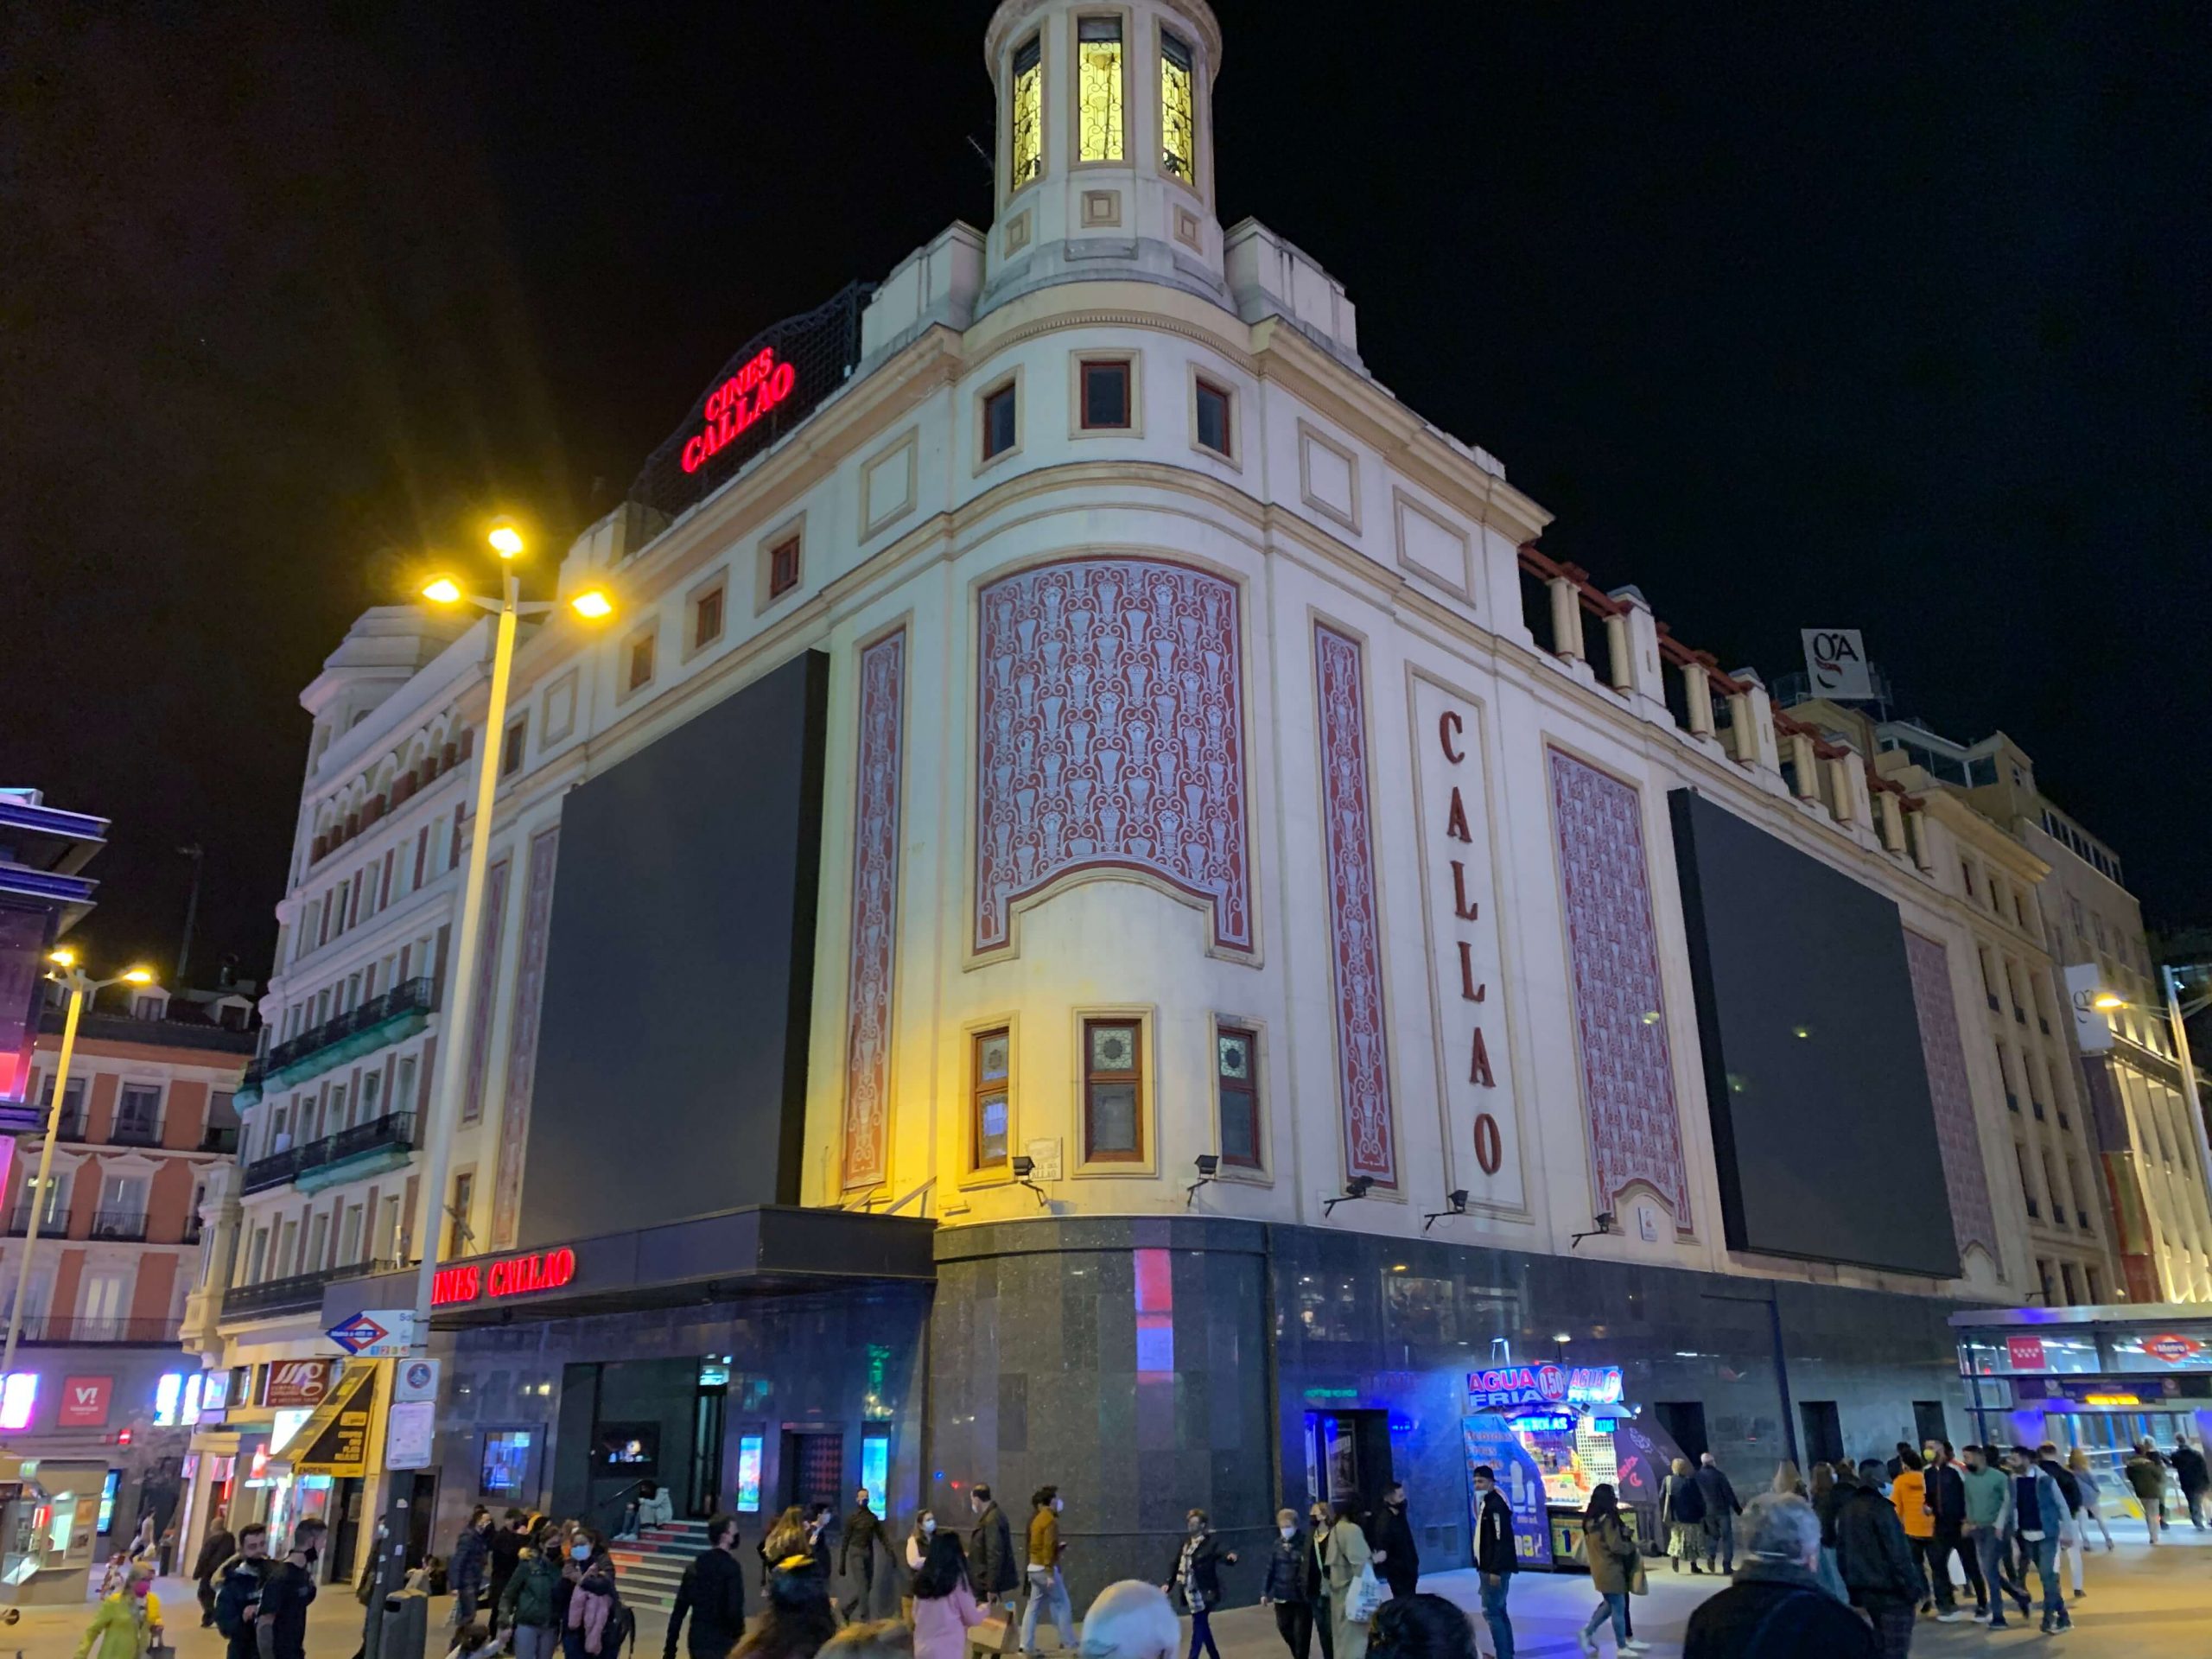 CALLAO CITY LIGHTS JOINS 'EARTH HOUR' 2022